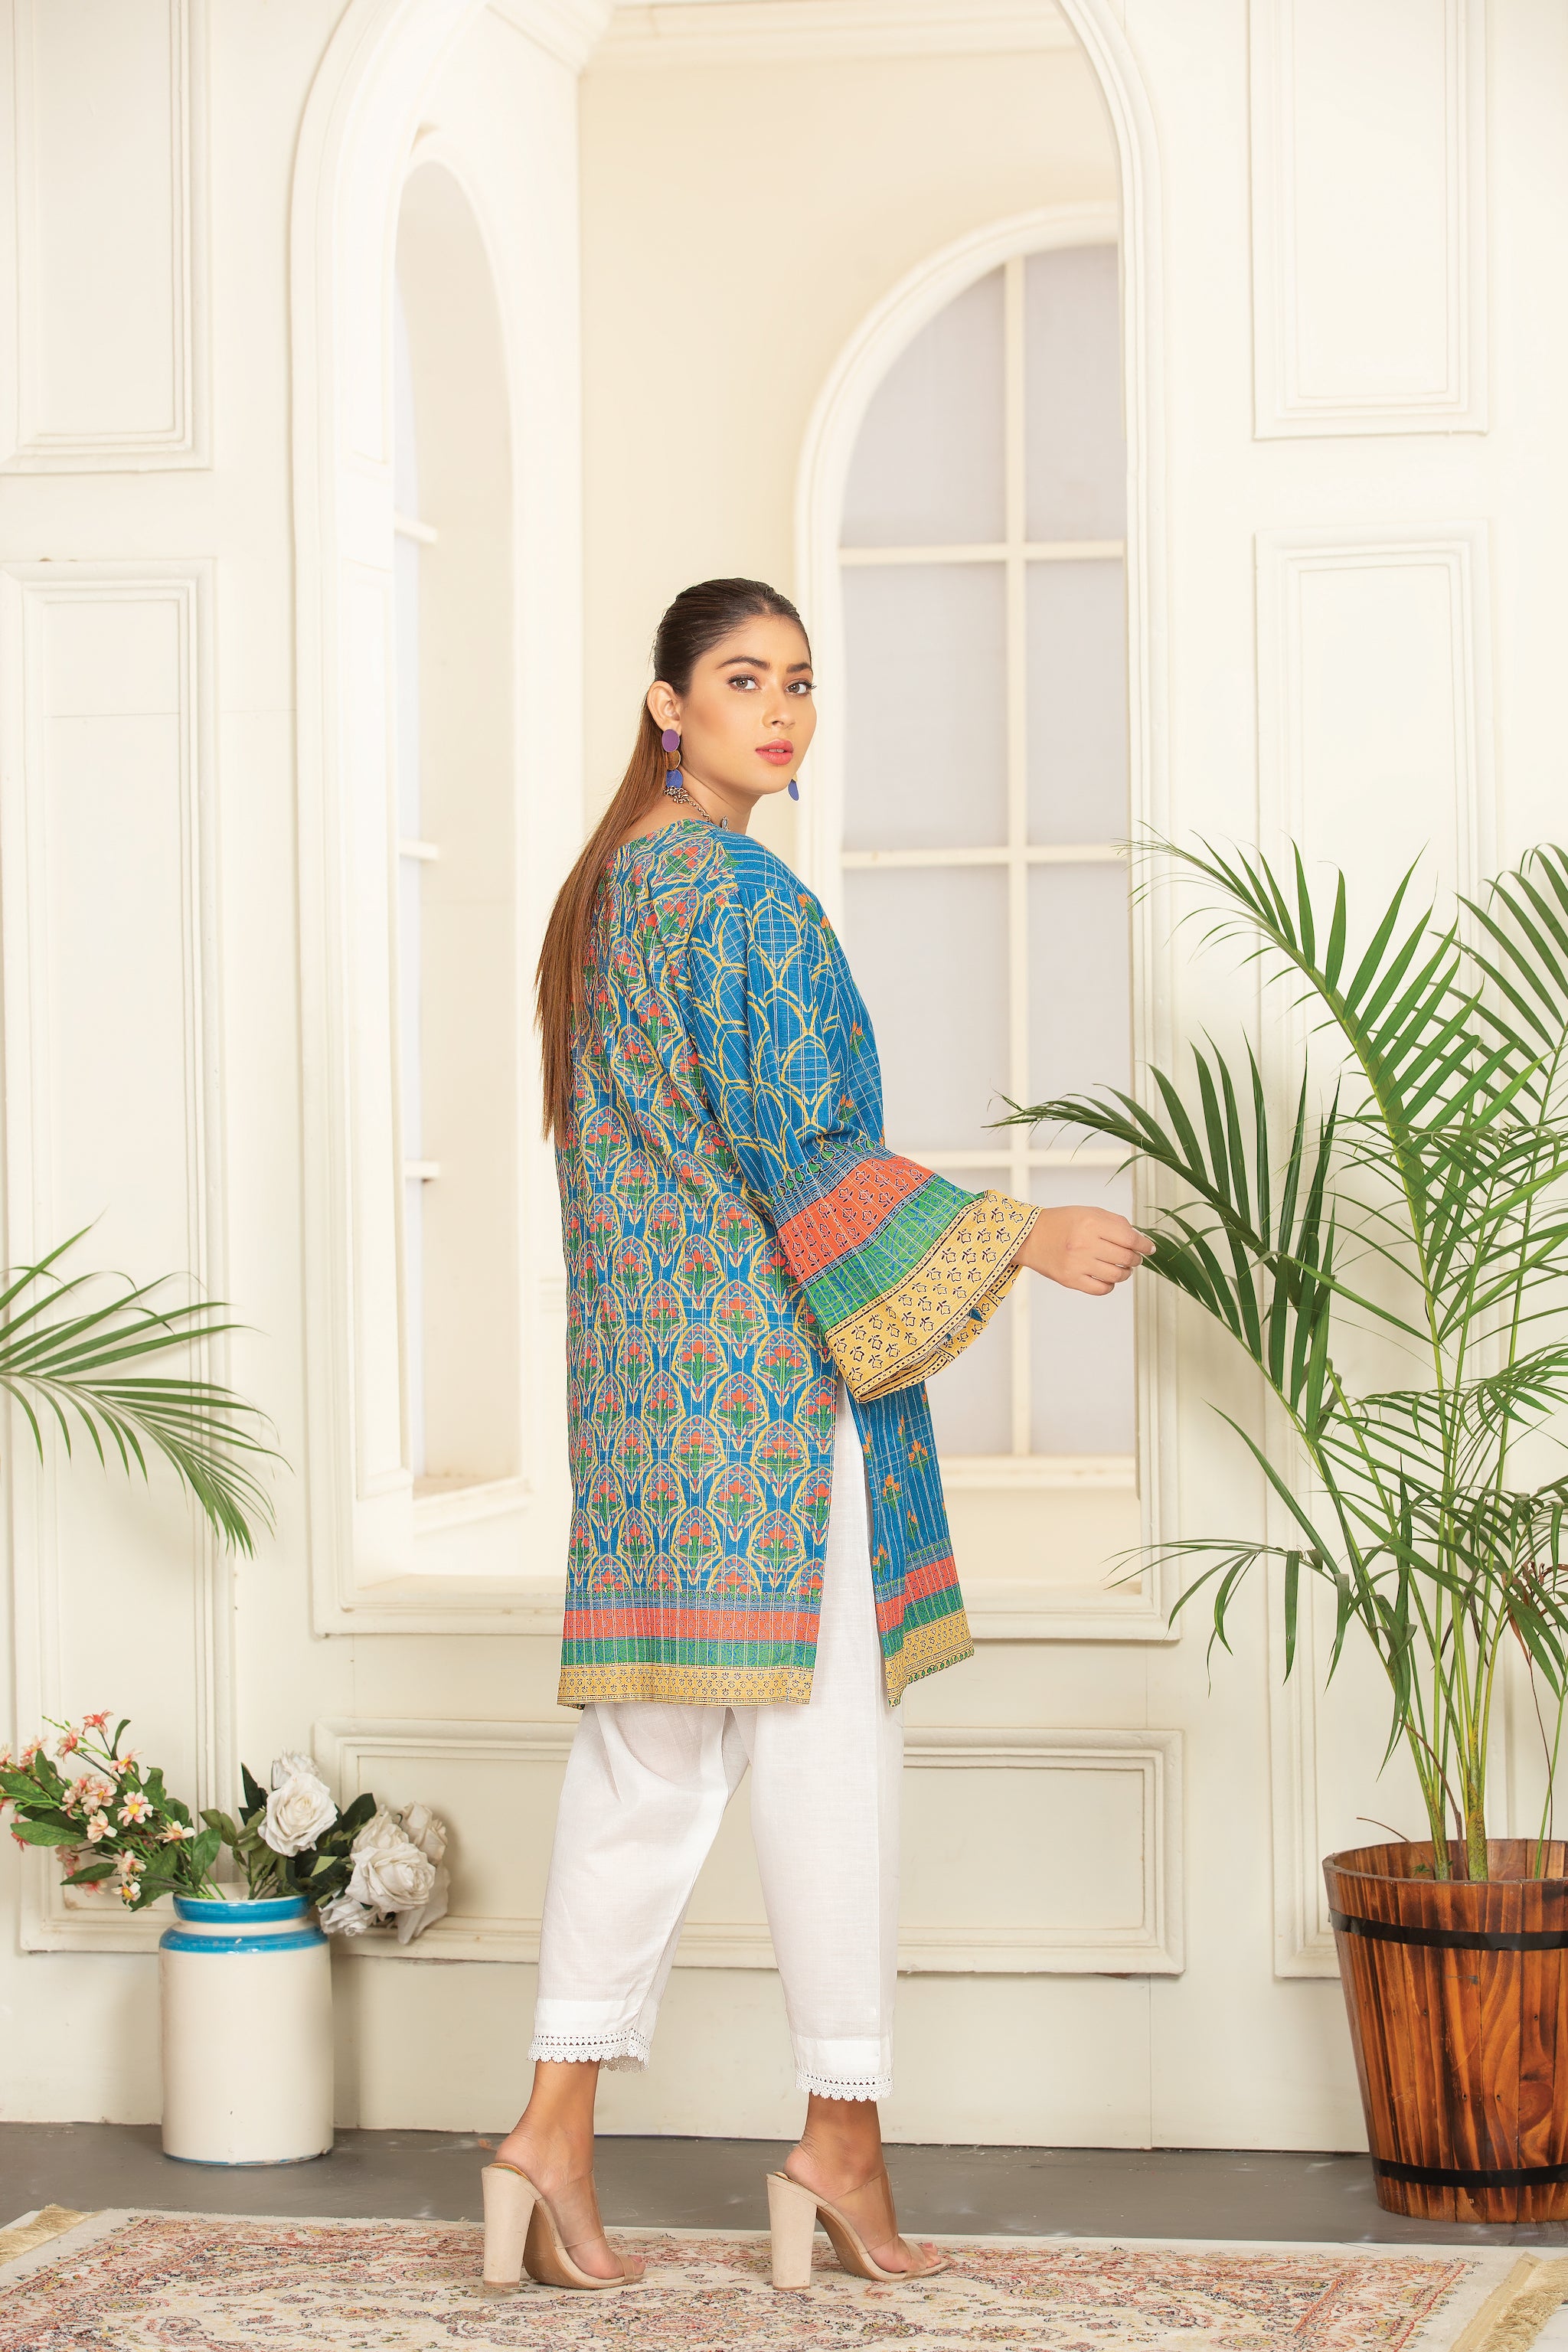 ZAVIYA COLLECTION / 1PC / DIGITAL PRINTED EMBROIDERED KHADDAR SHIRT 1.75MTR PRICE 1225/- PKR WINTER 2022 COLLECTION BY SAFA NOOR 